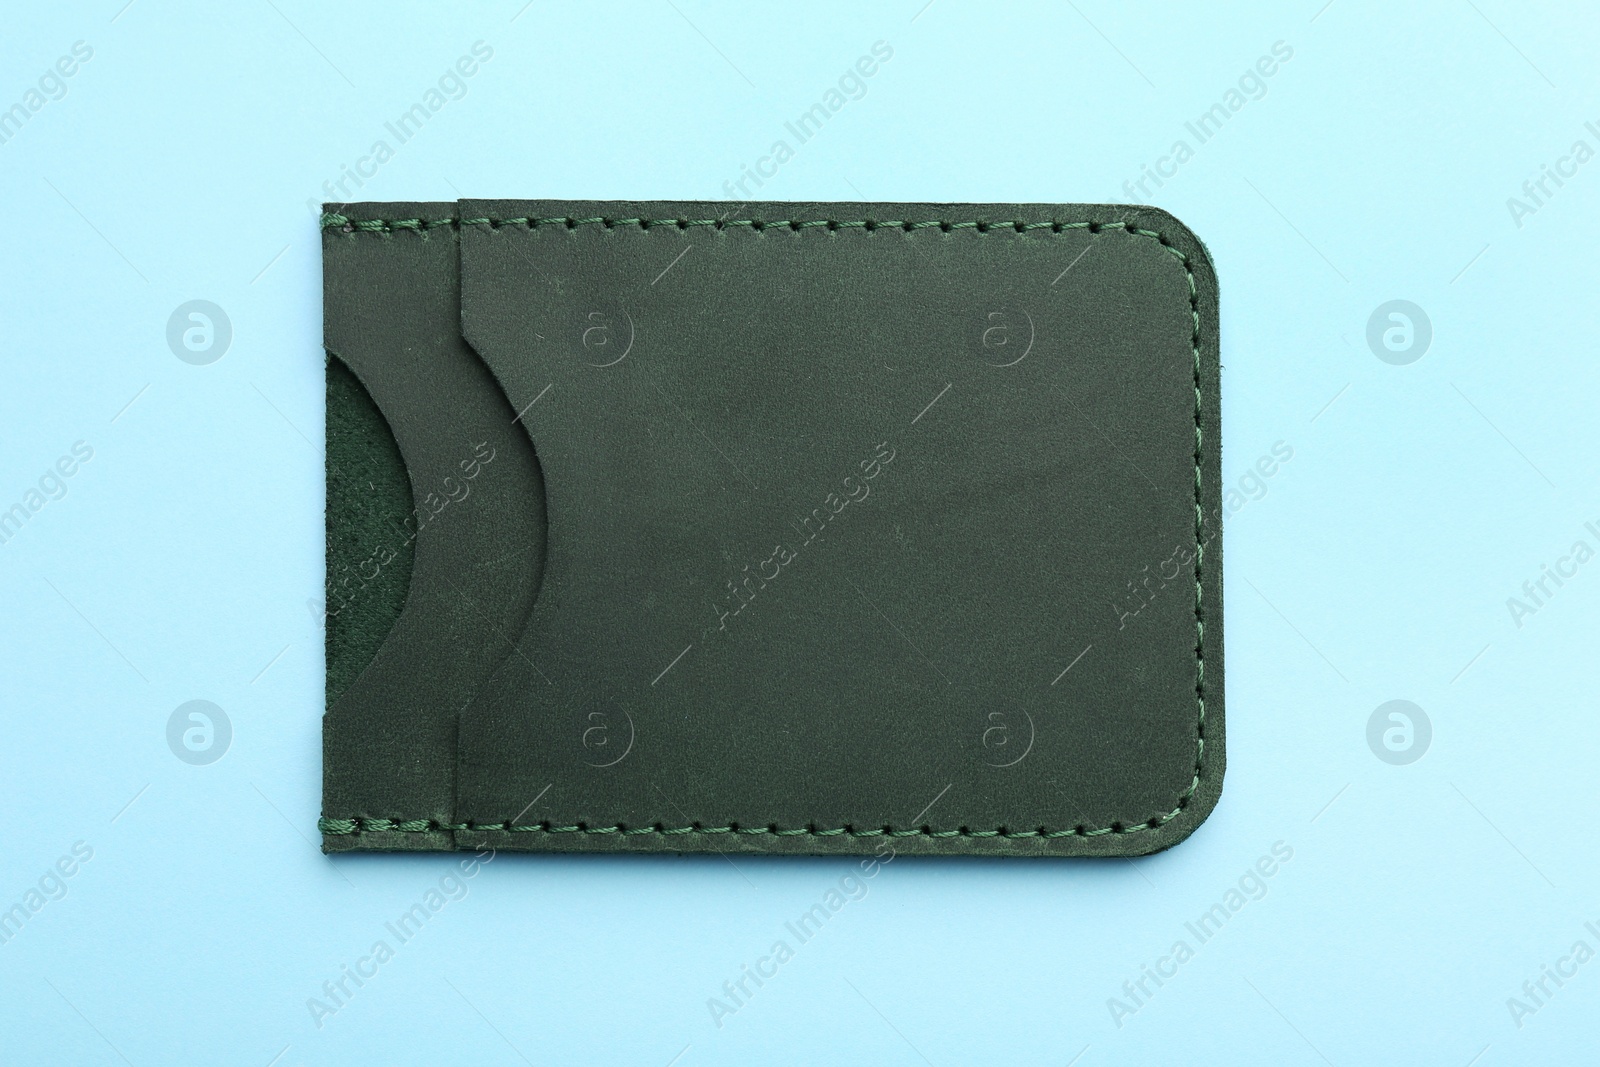 Photo of Empty leather card holder on light blue background, top view